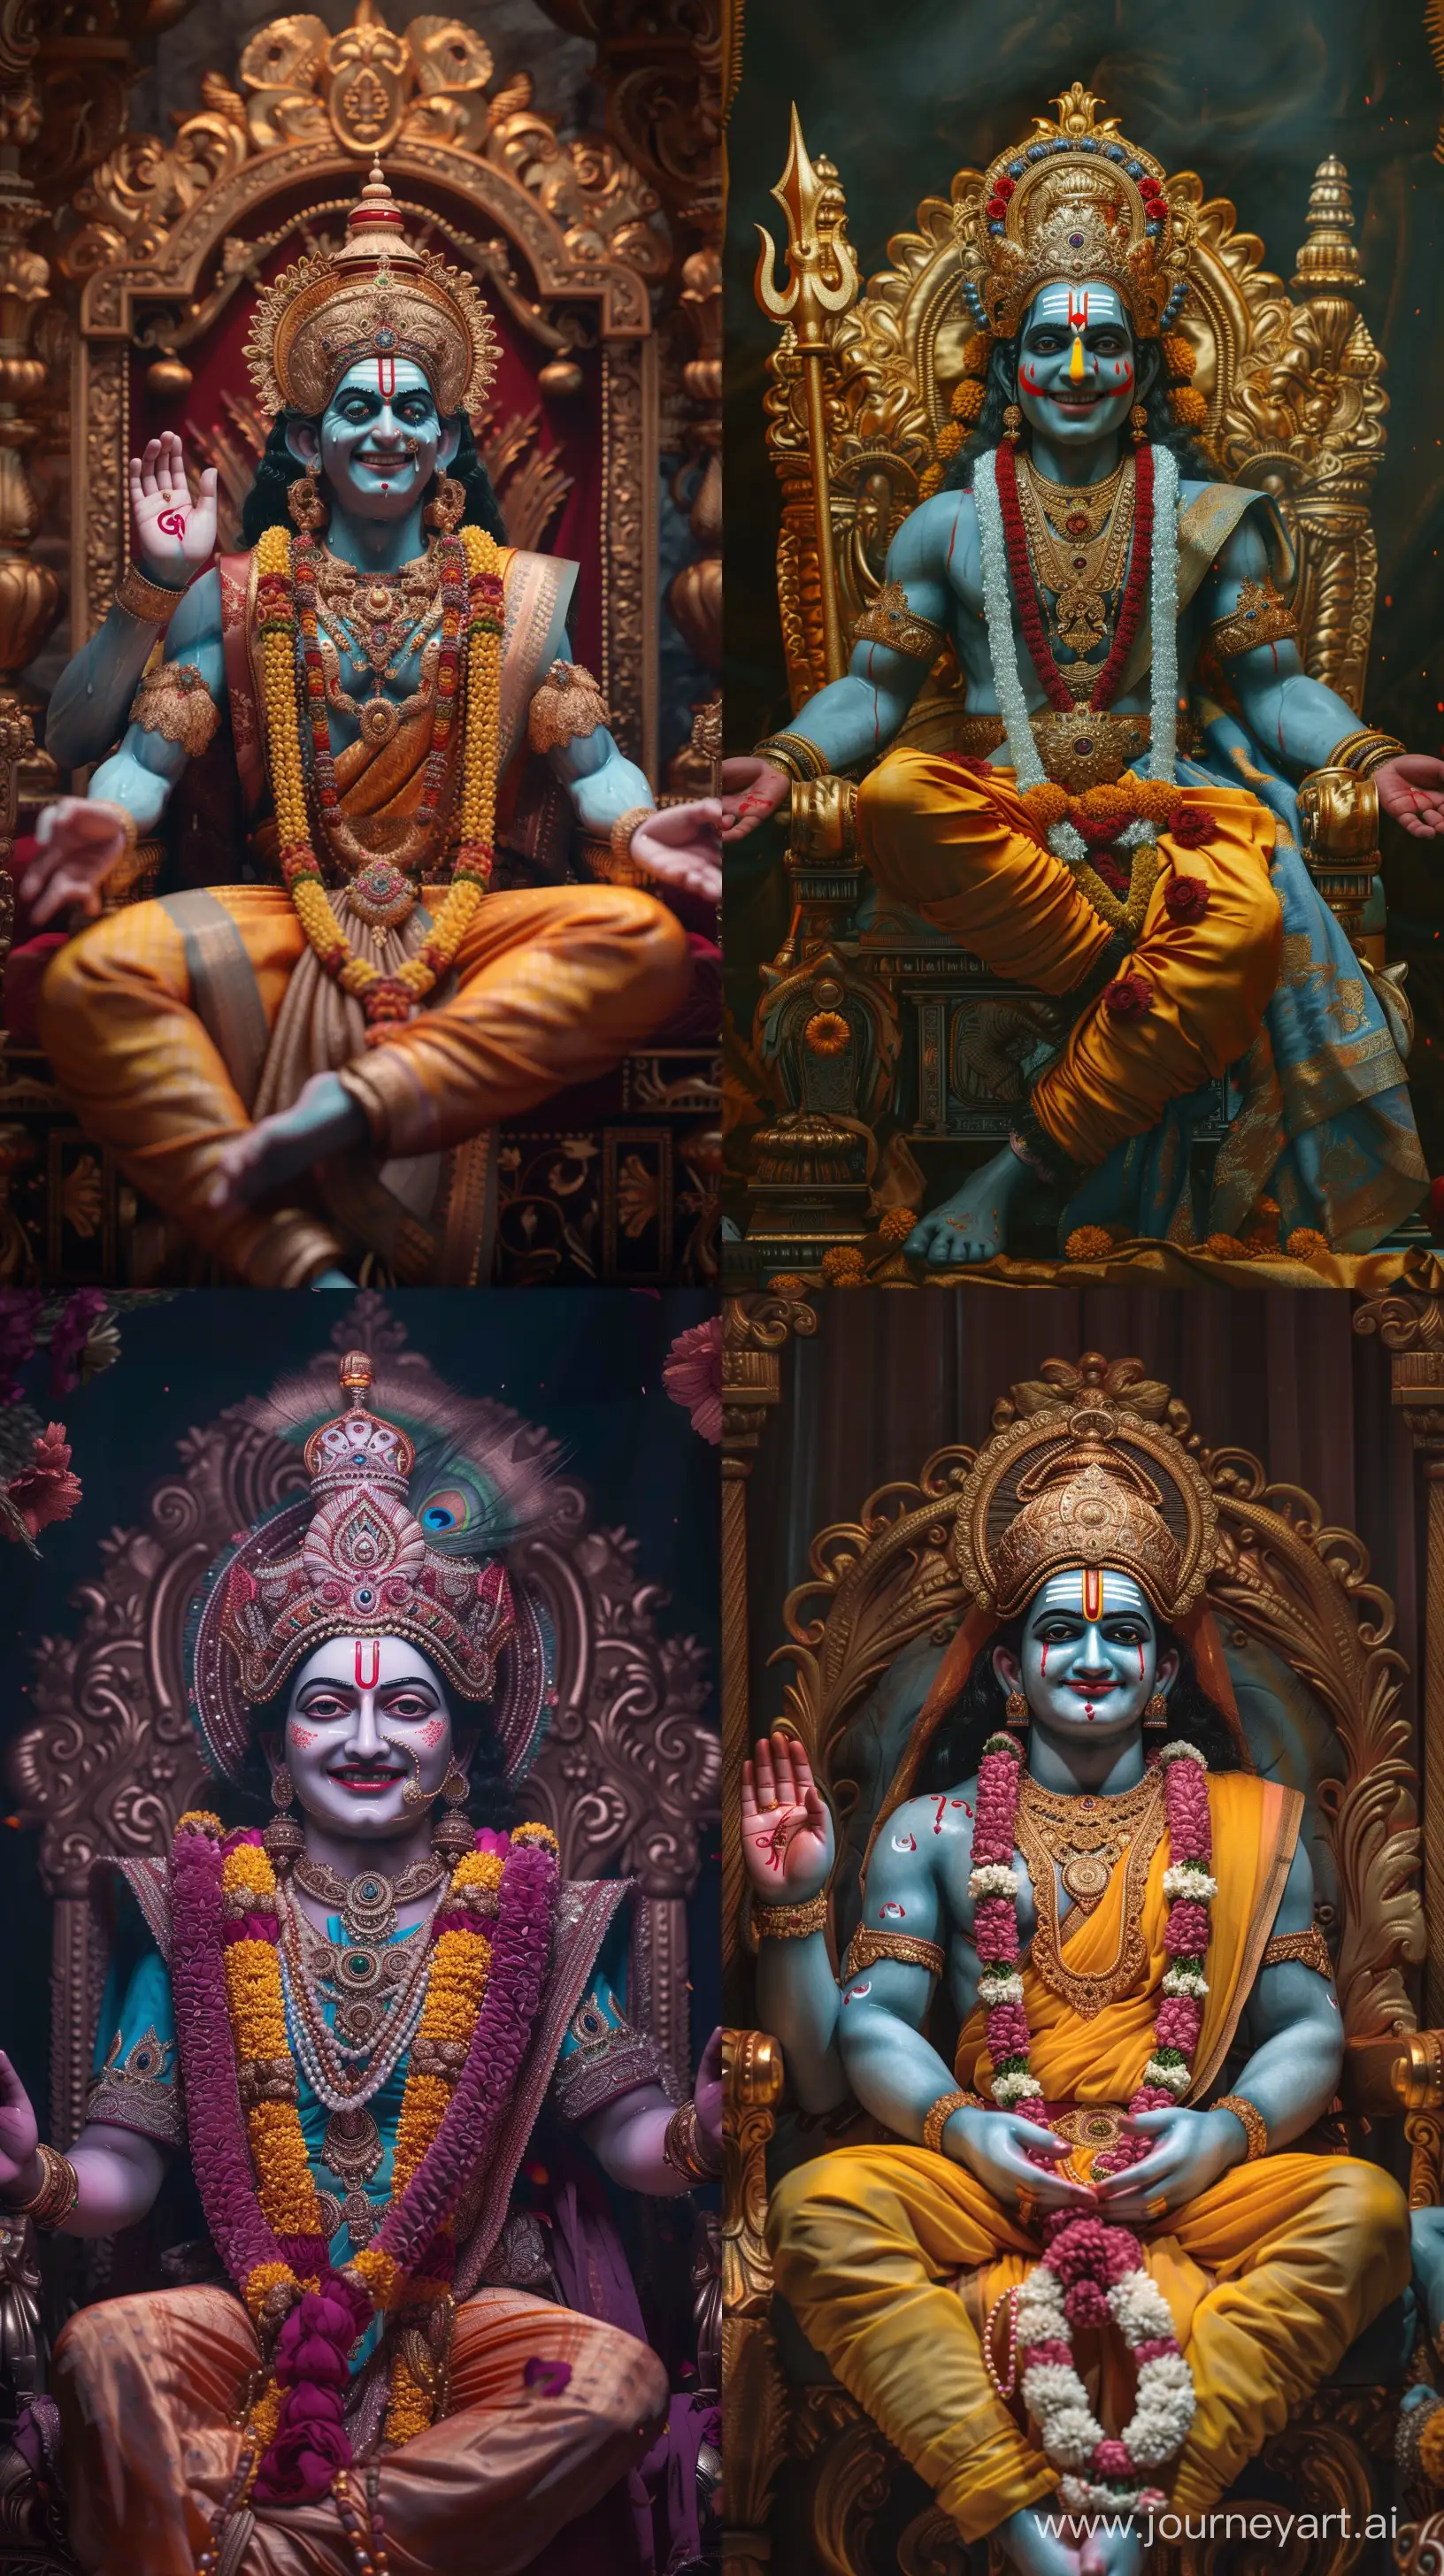 Lord-Rama-Smiling-on-Throne-with-Tears-Realistic-CloseUp-Depiction